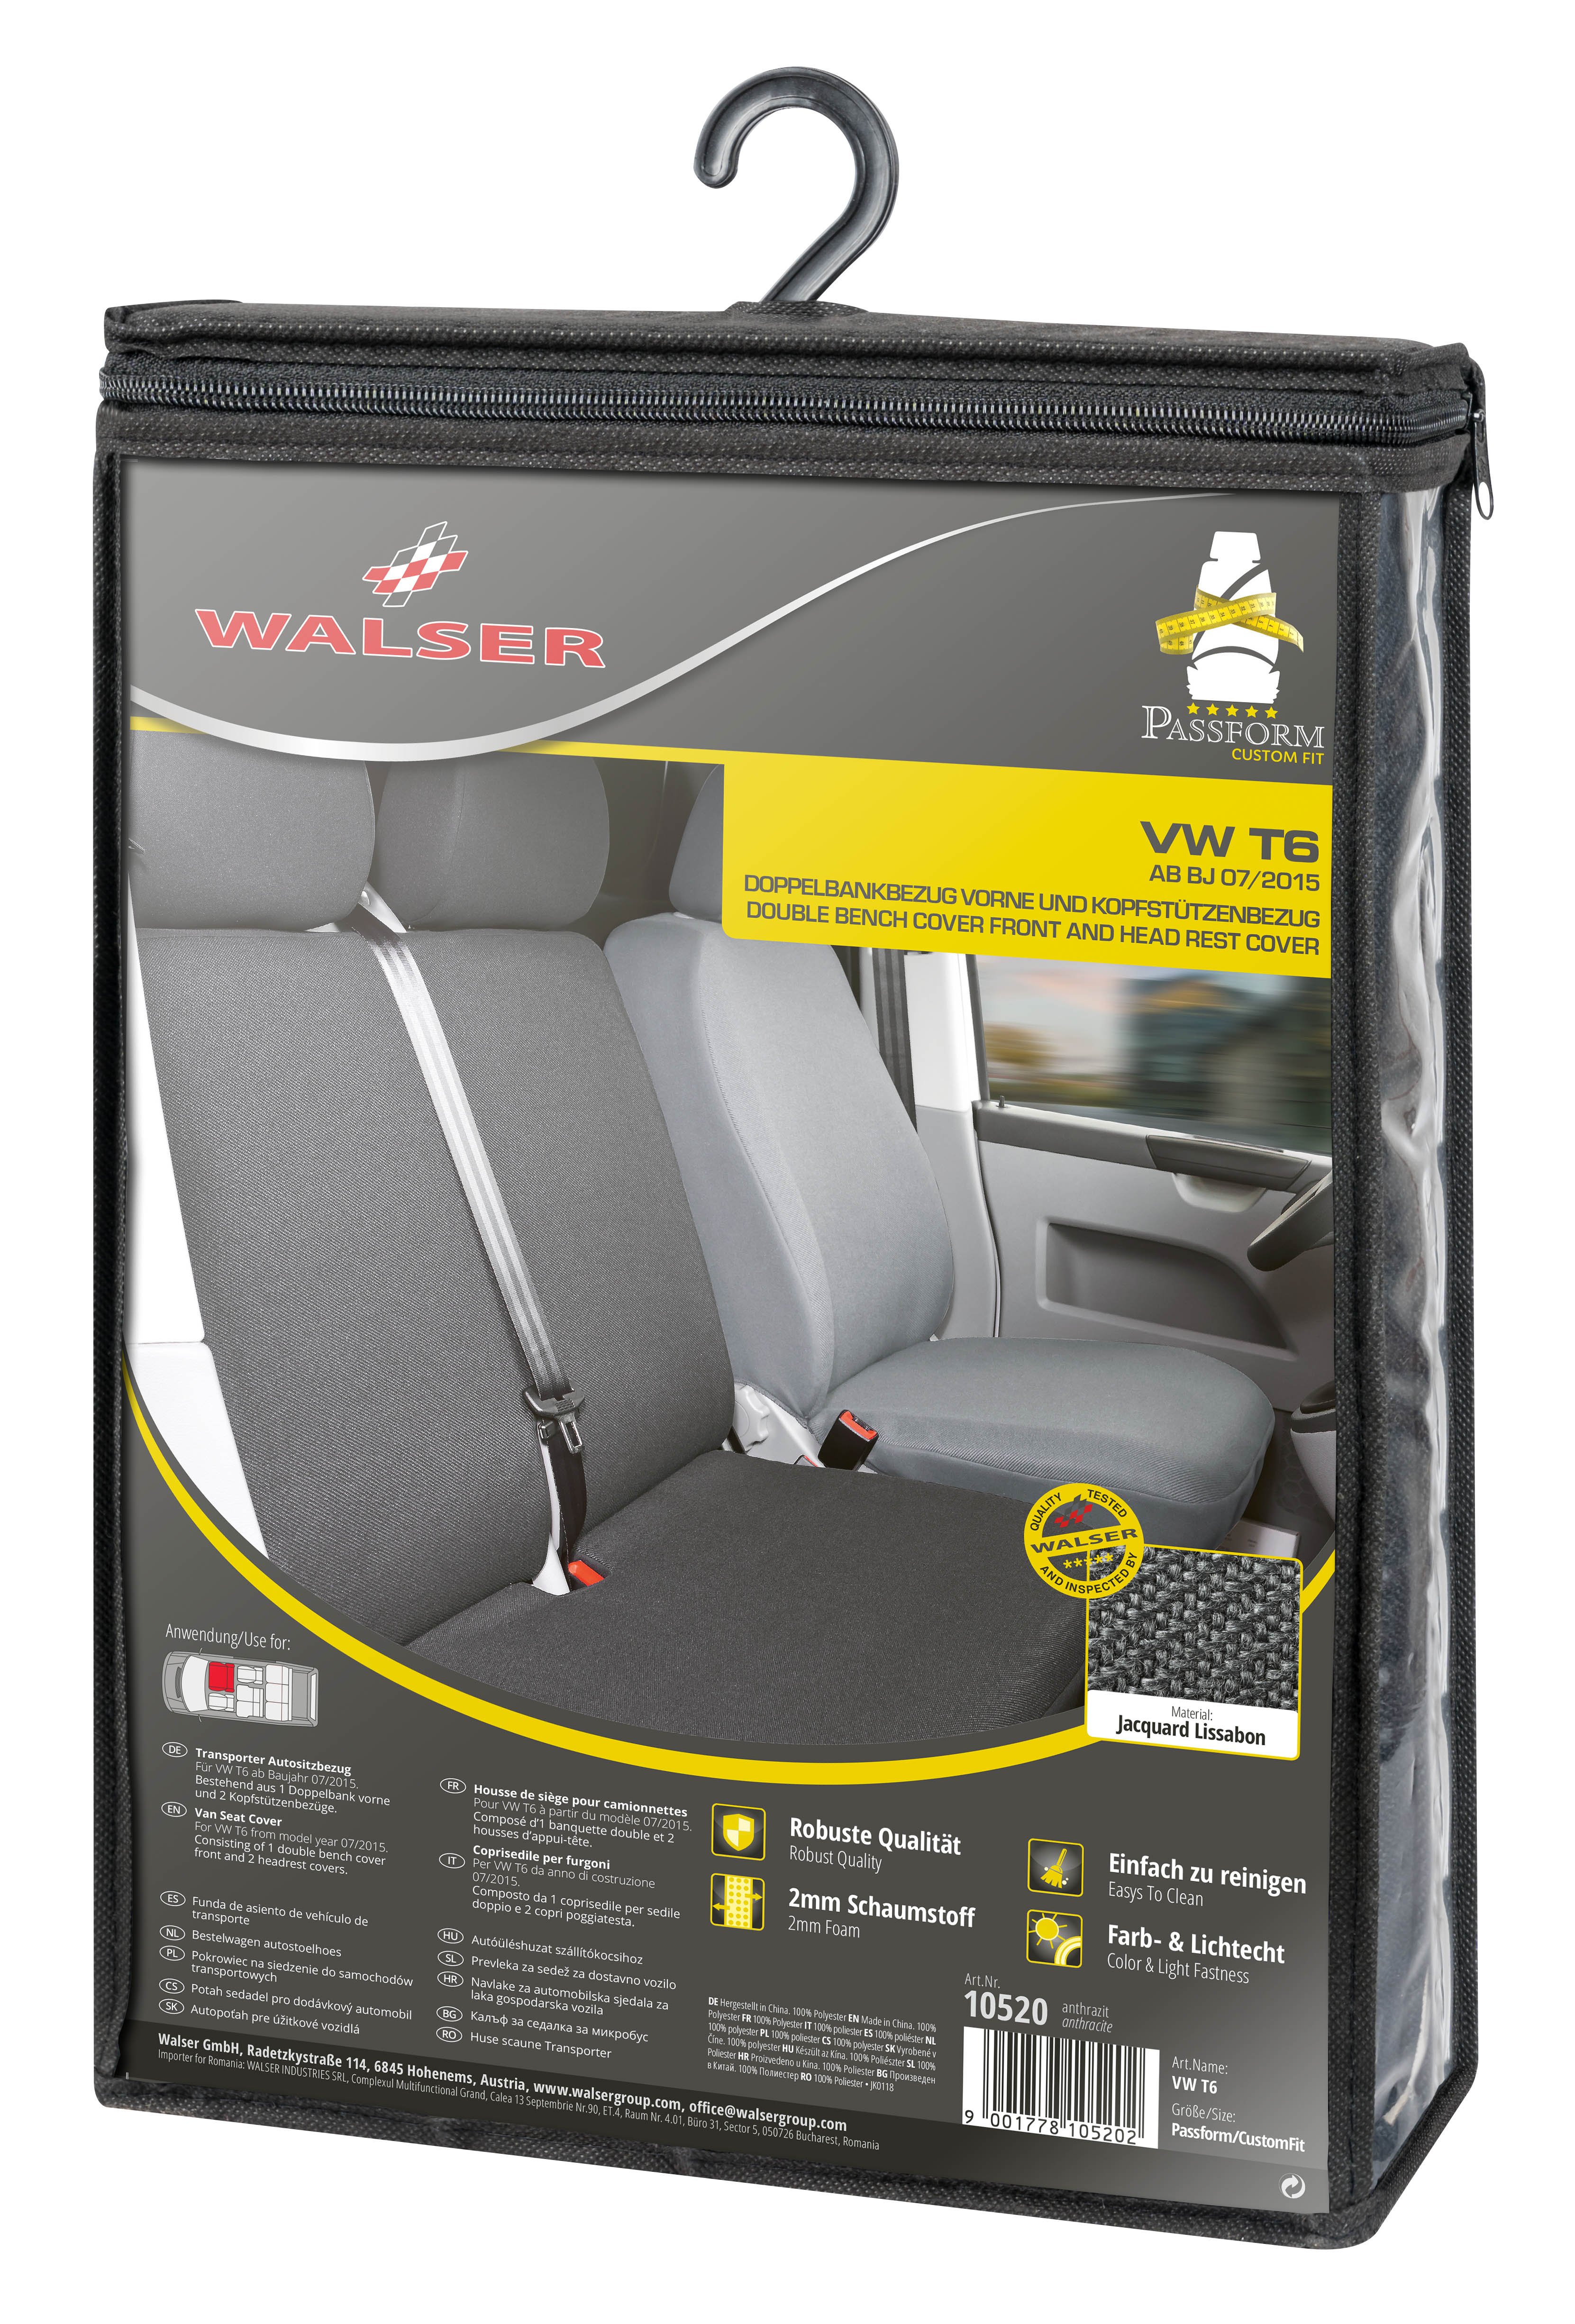 Car Seat cover Transporter made of fabric for VW T6, double bench front